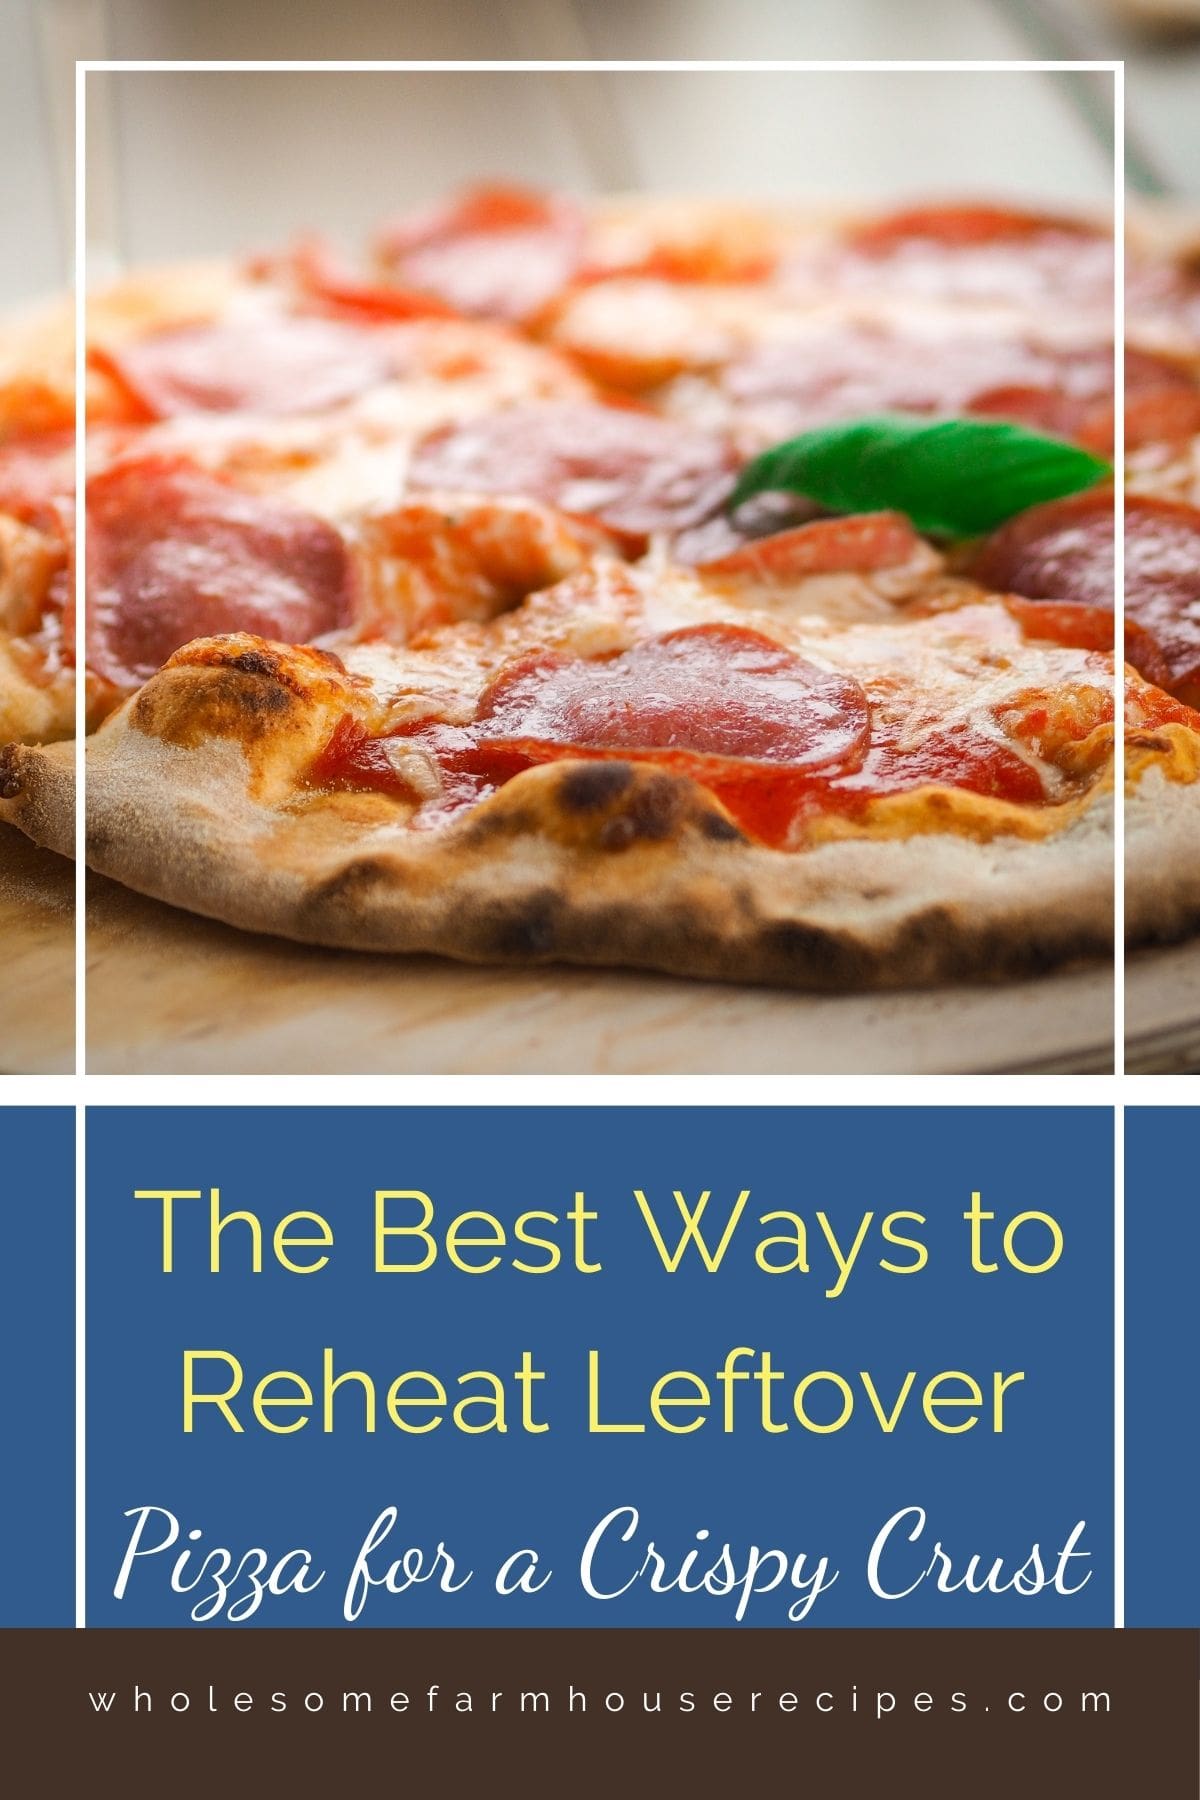 The Best Ways to Reheat Leftover Pizza for a Crispy Crust